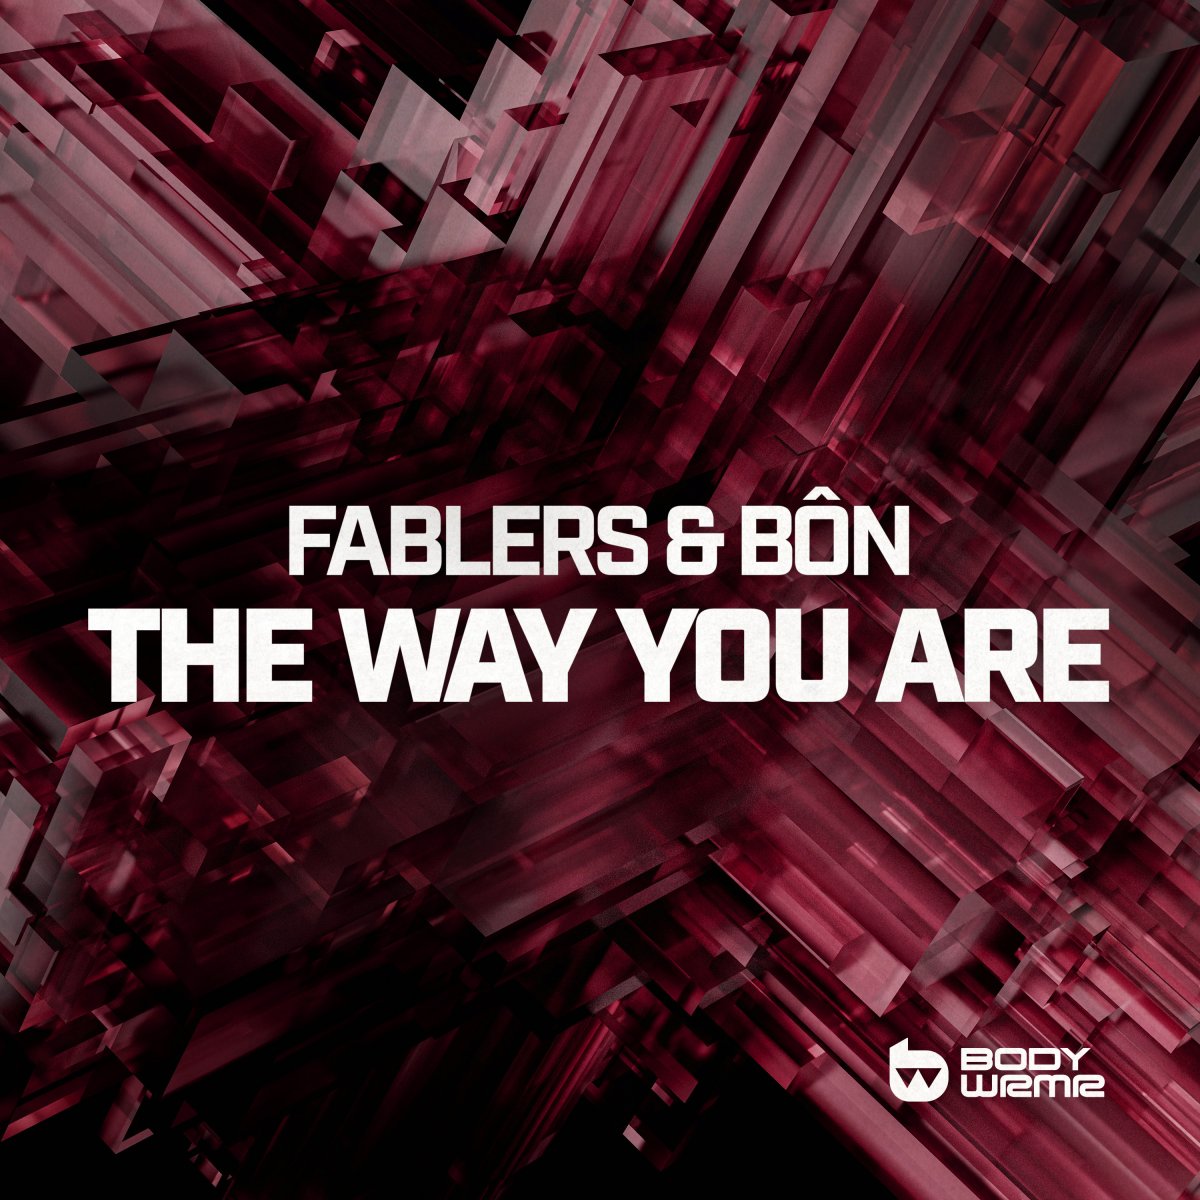 The Way You Are - Fablers⁠ & BÔN⁠ 